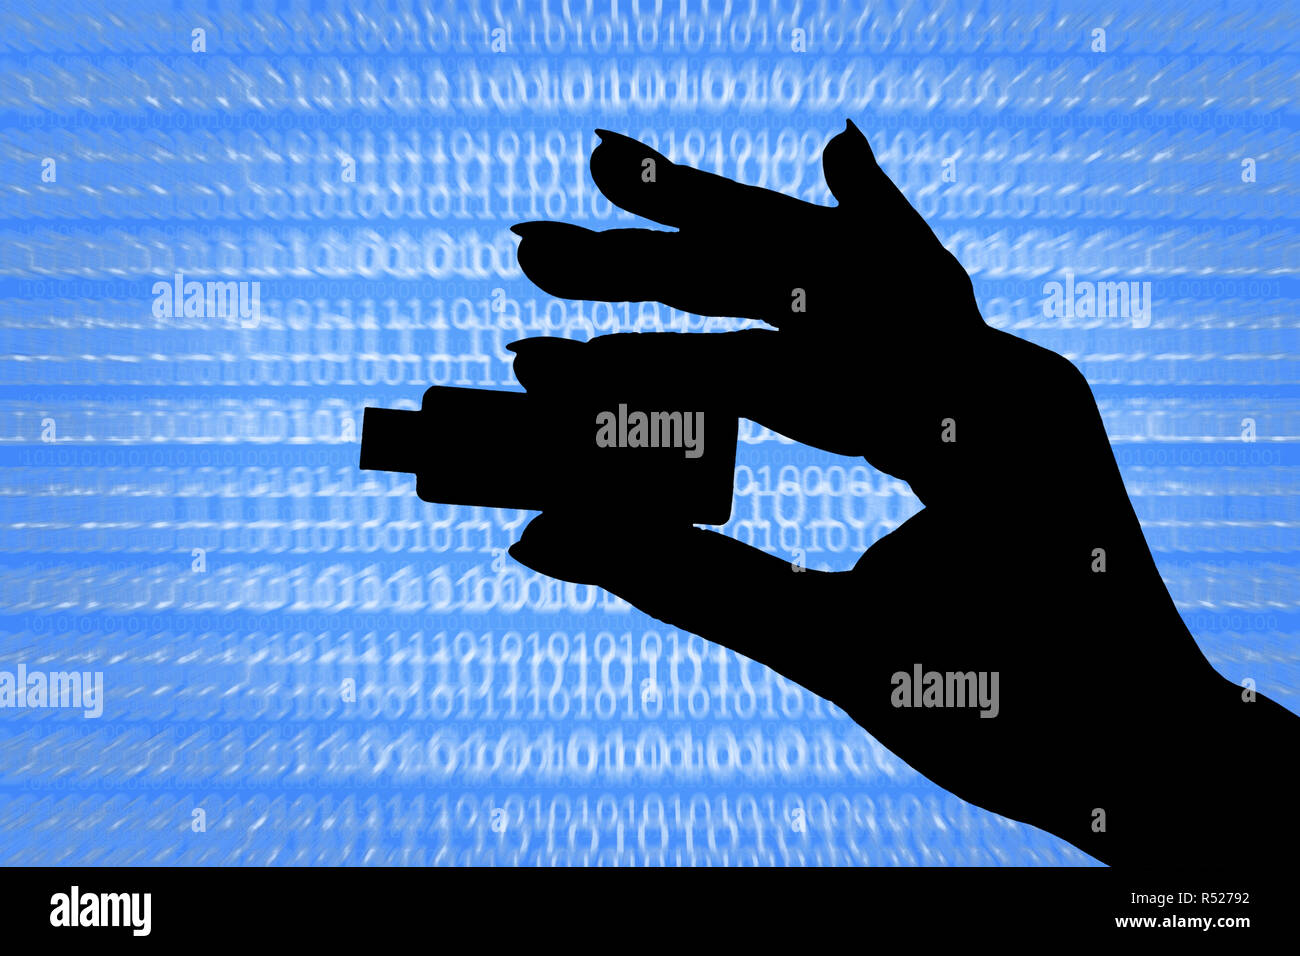 Silhouette of a hand holding a flash drive on an abstract digital background. The concept of data theft, data protection, computer hacking. Stock Photo